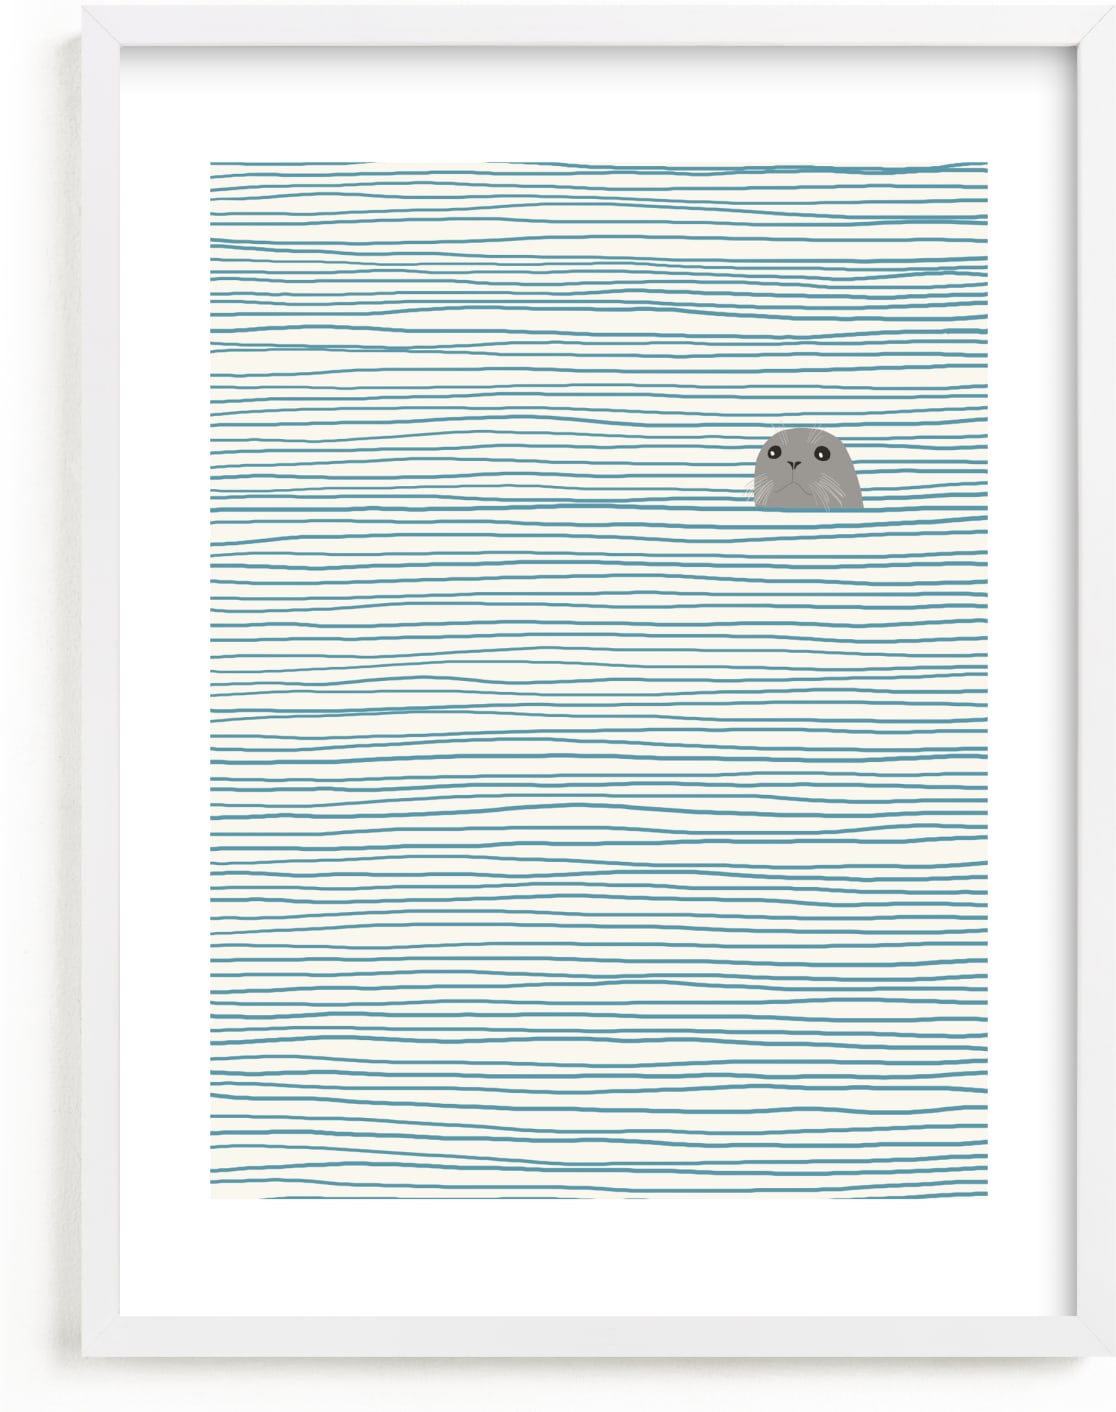 This is a blue, white, grey kids wall art by Jorey Hurley called Seal.